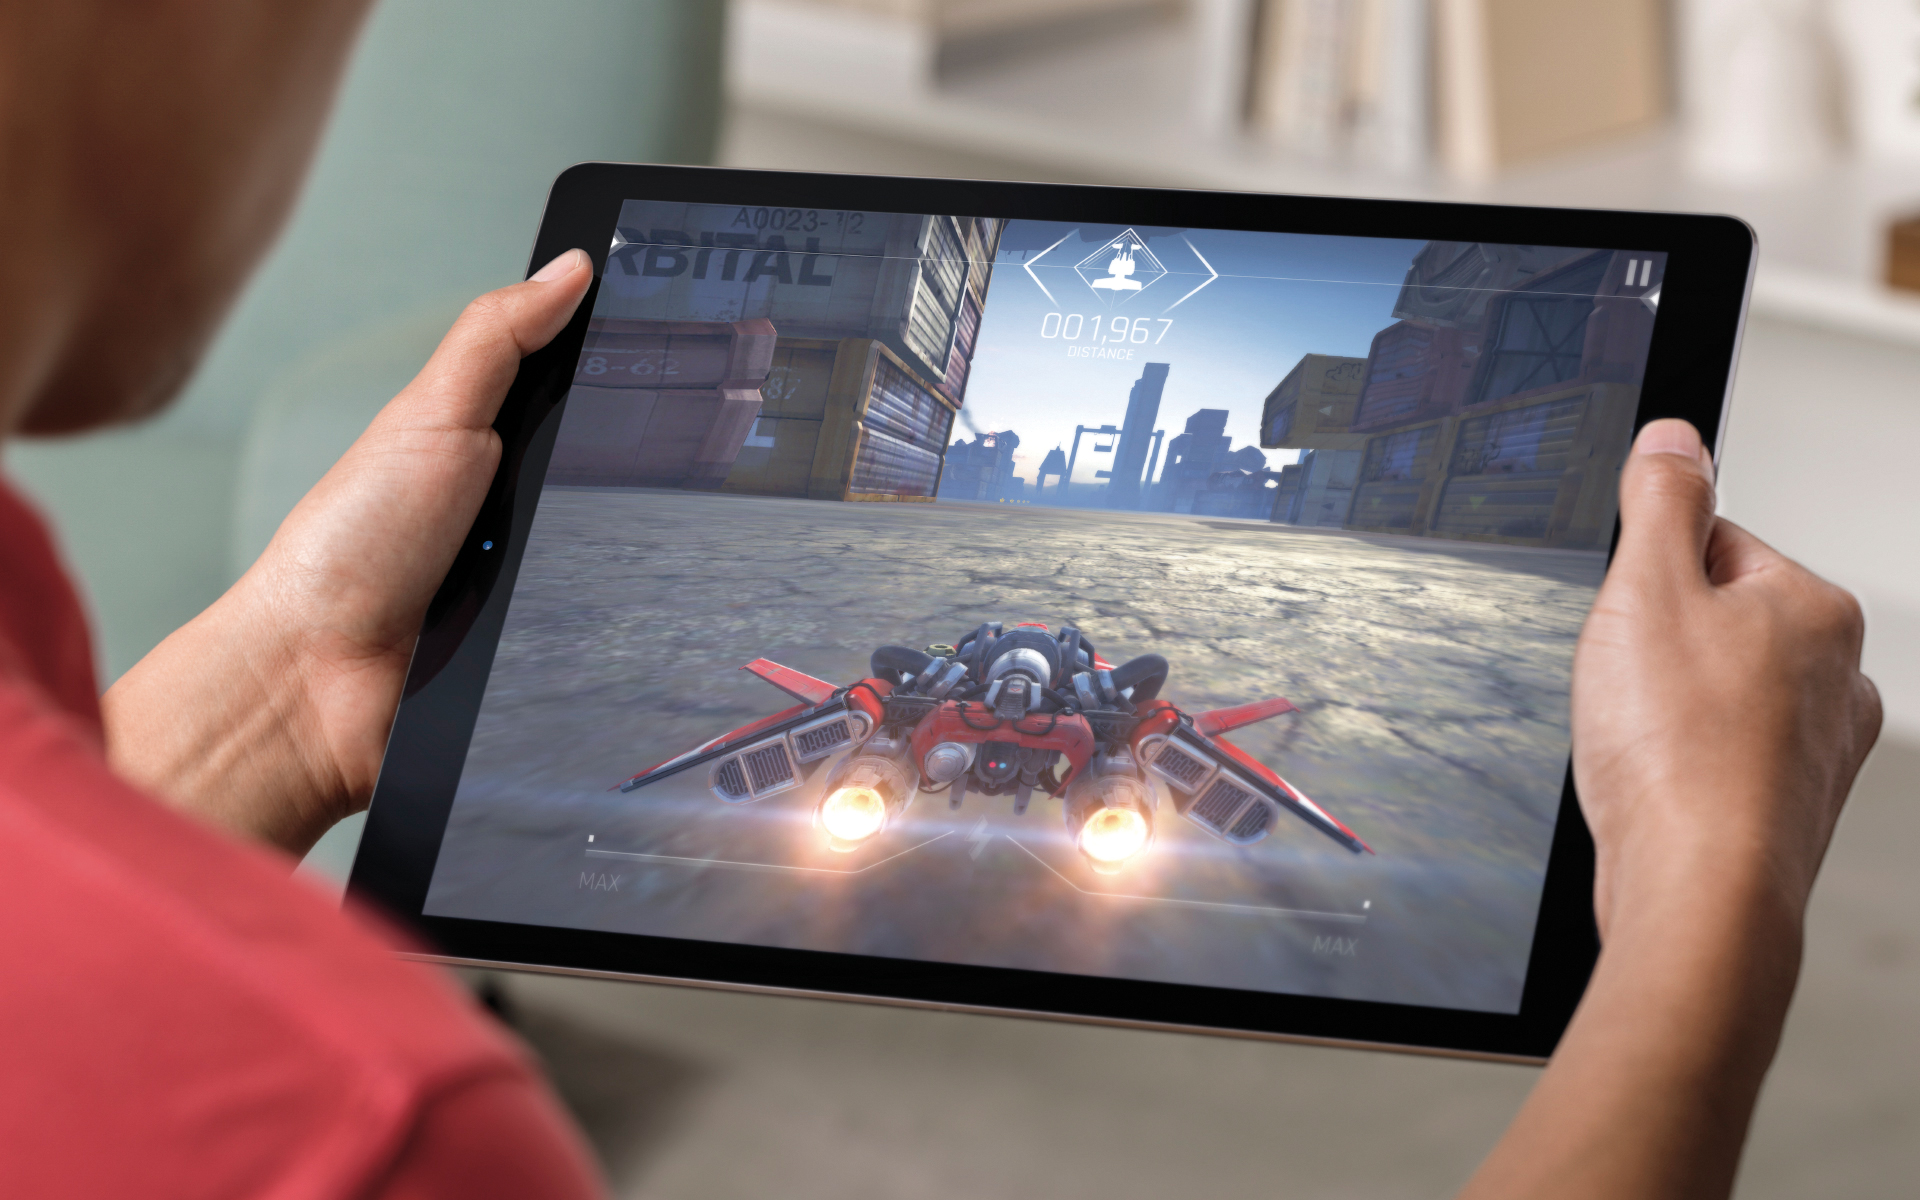 User playing on an iPad Pro